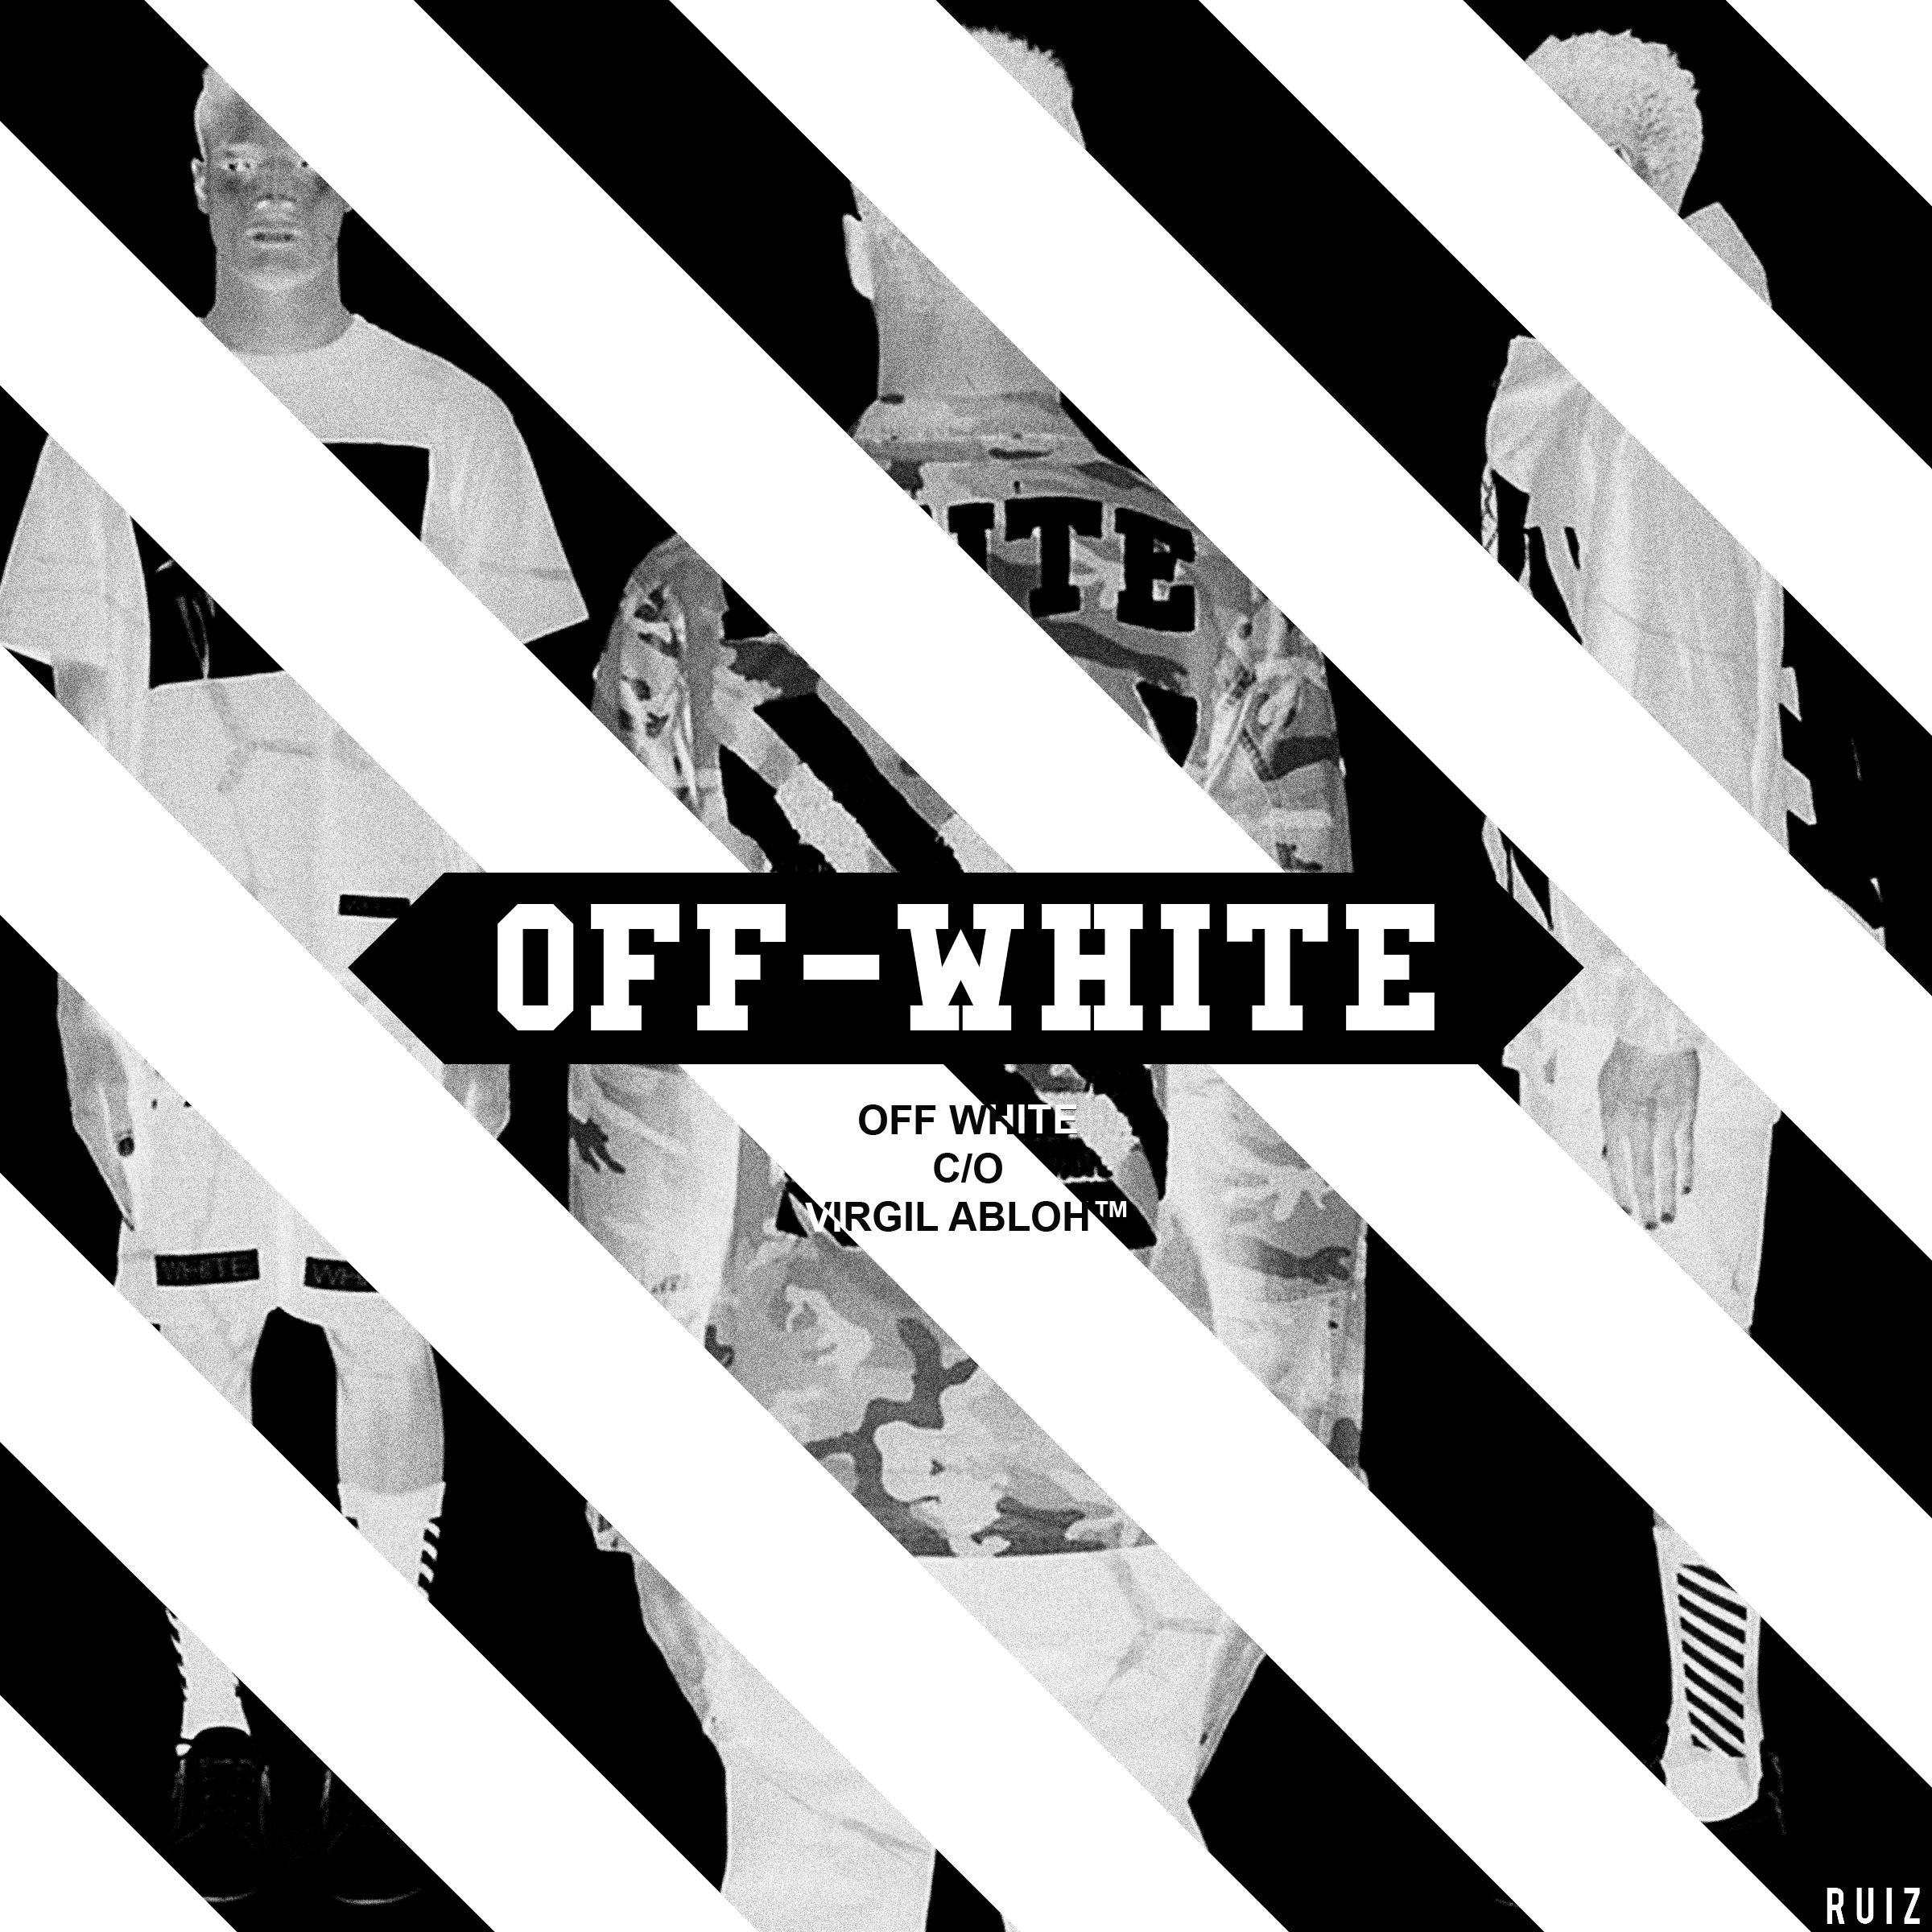 Off White Clothing Brand Logo - Off-White c/o Virgil Abloh arrives in Malaysia. - MASSES